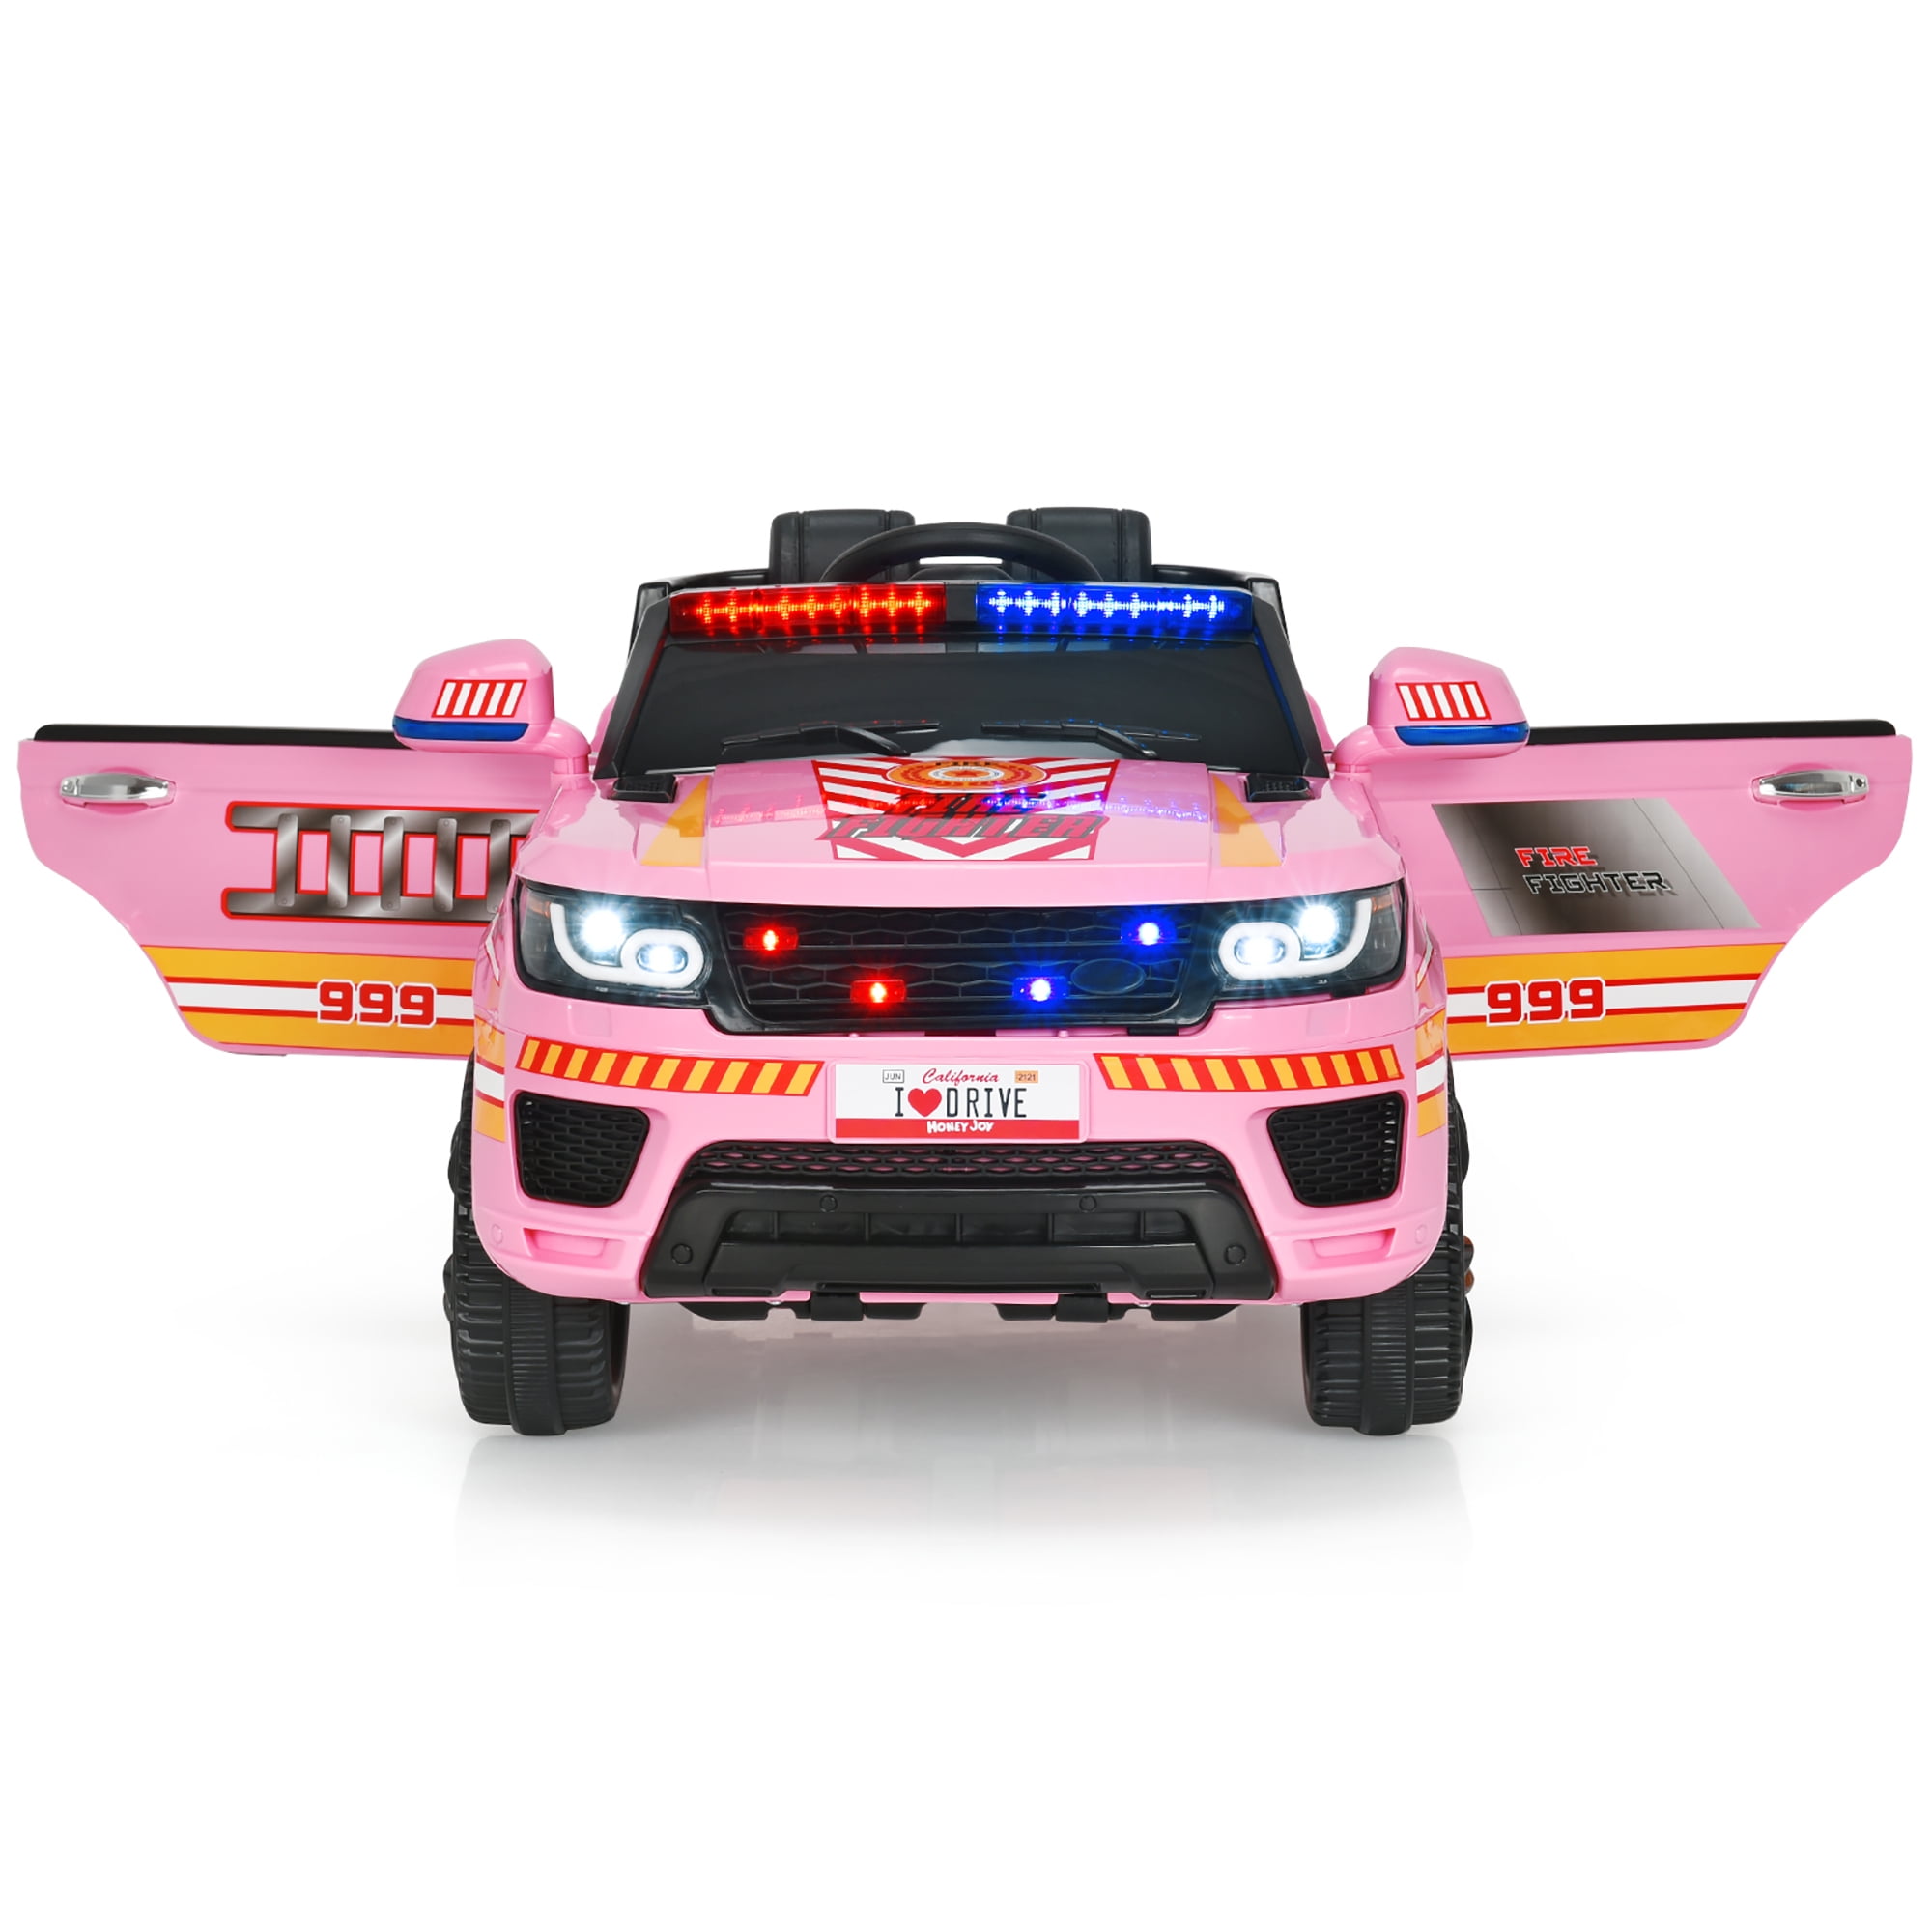 Police/ Fire/ Car Childs or Adult Facemask 